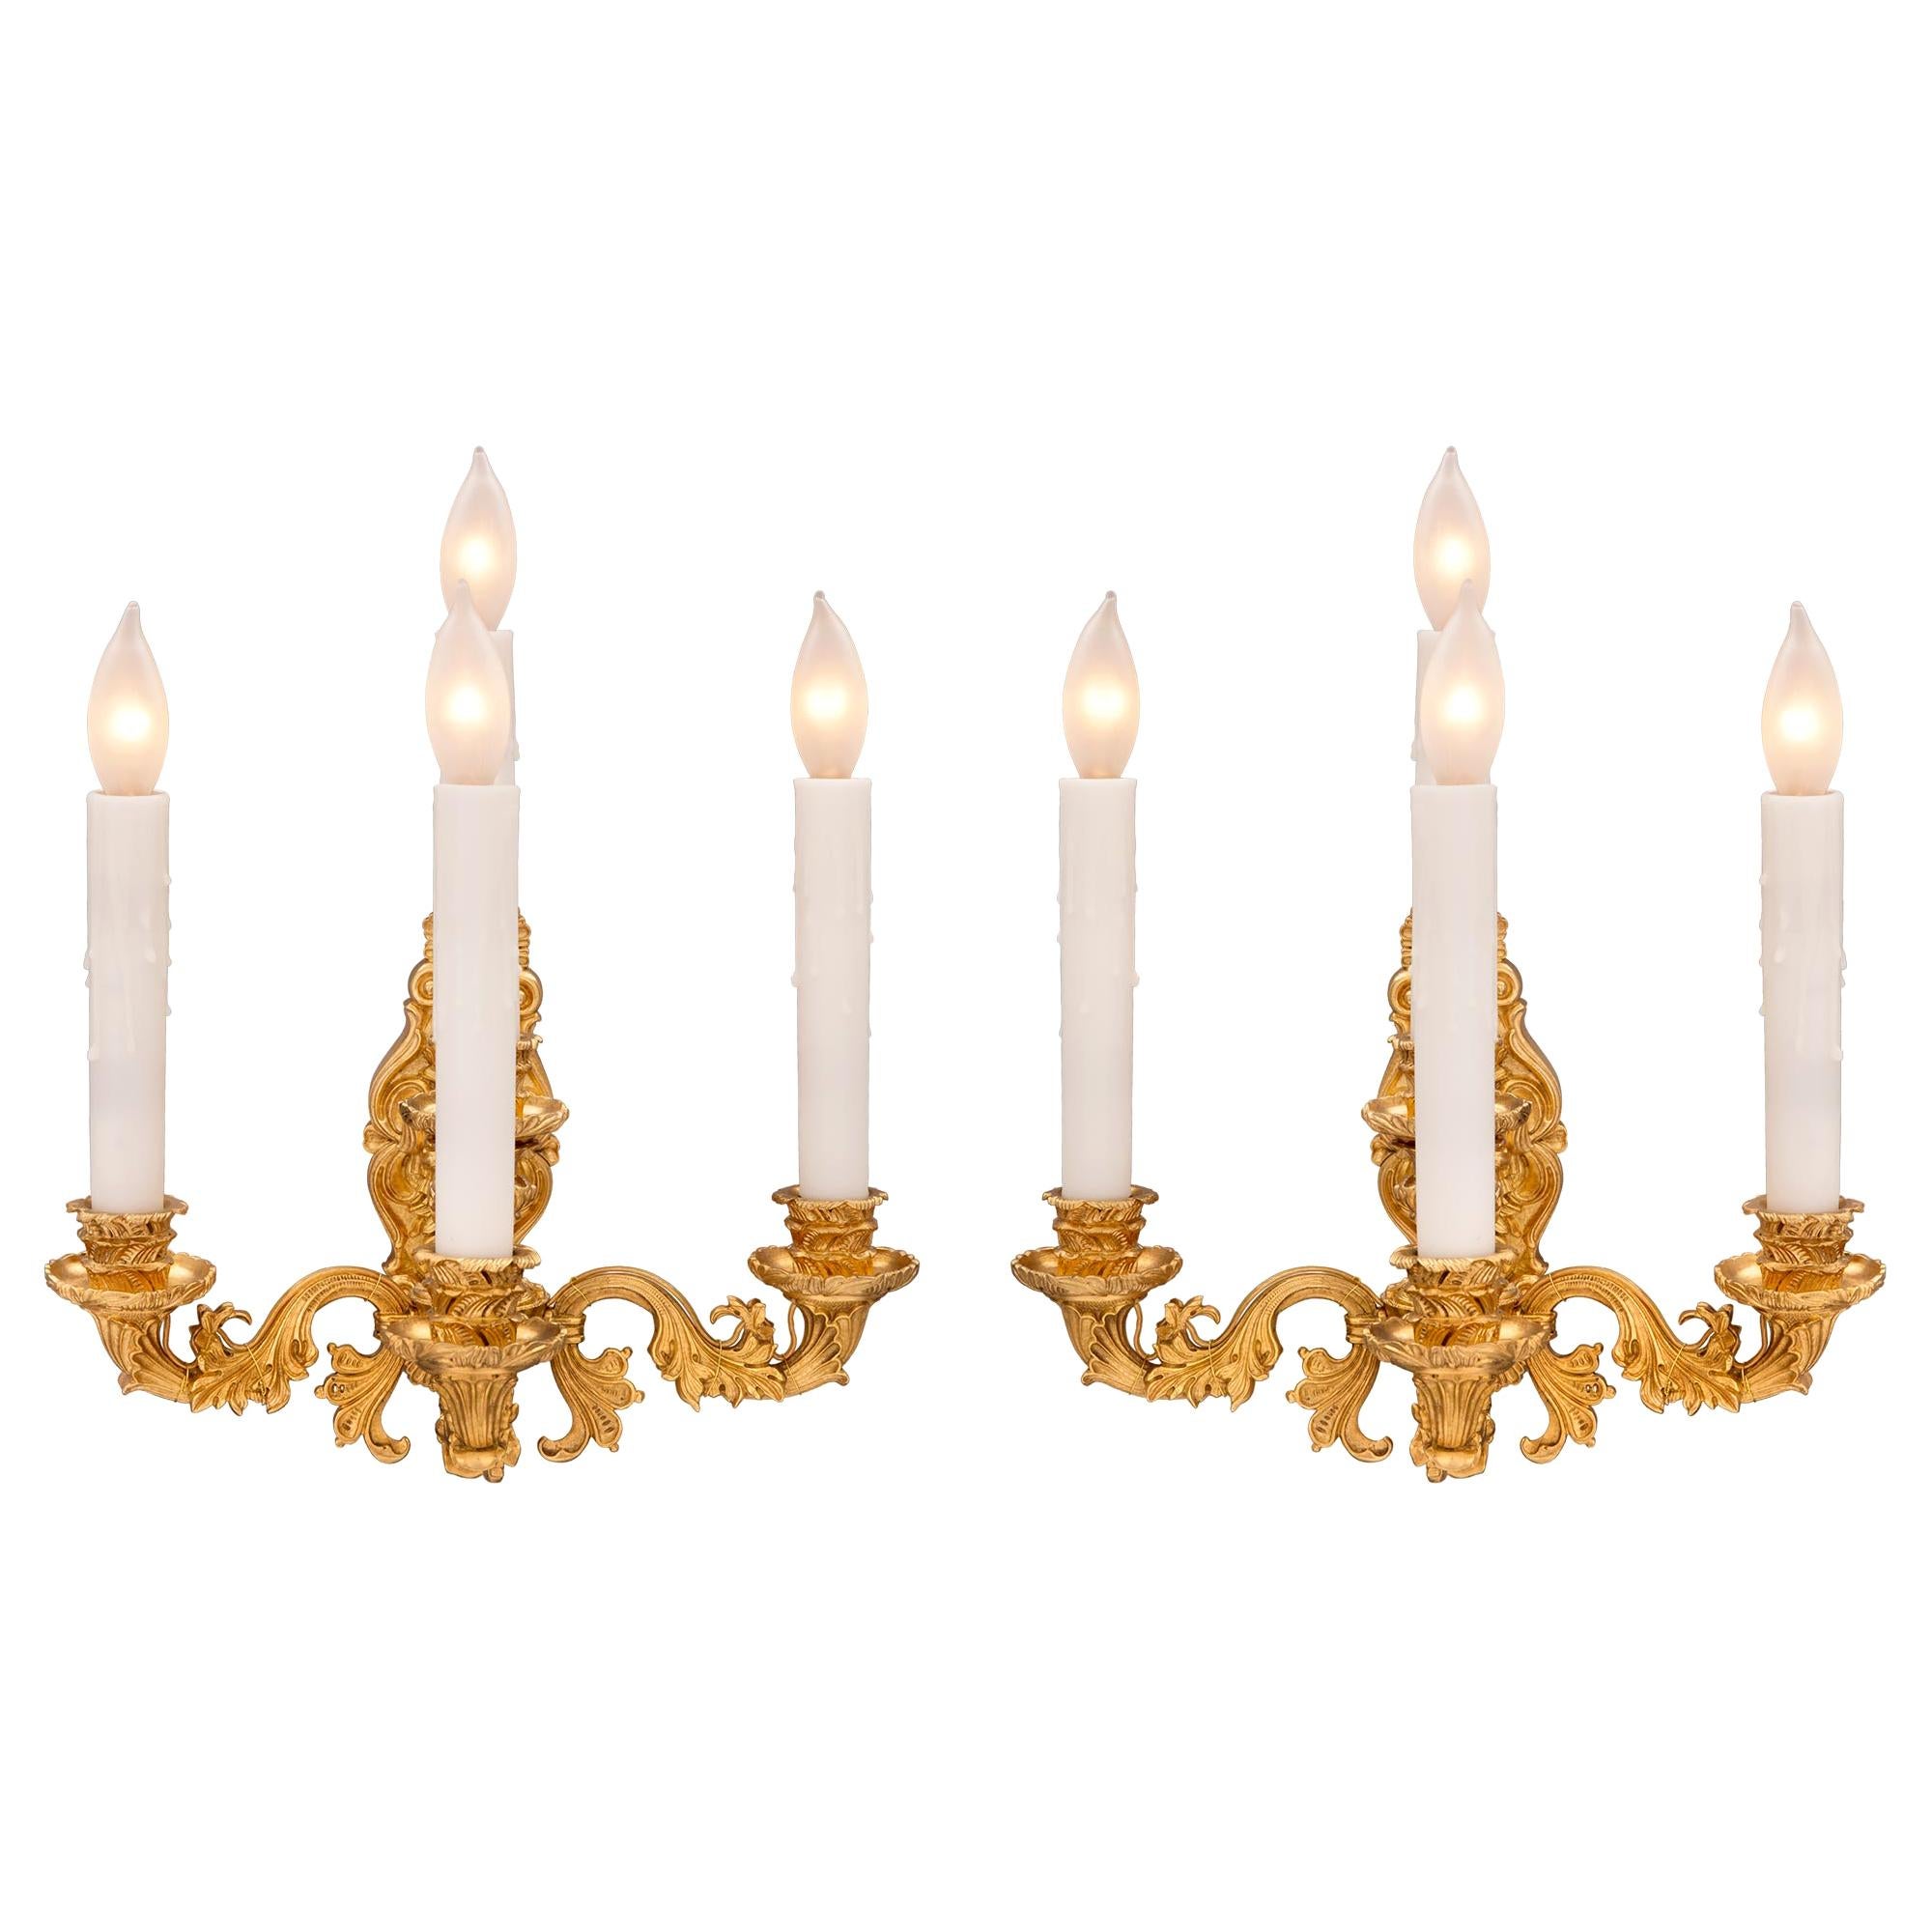 Pair of French 19th Century Charles X Style Ormolu Sconces